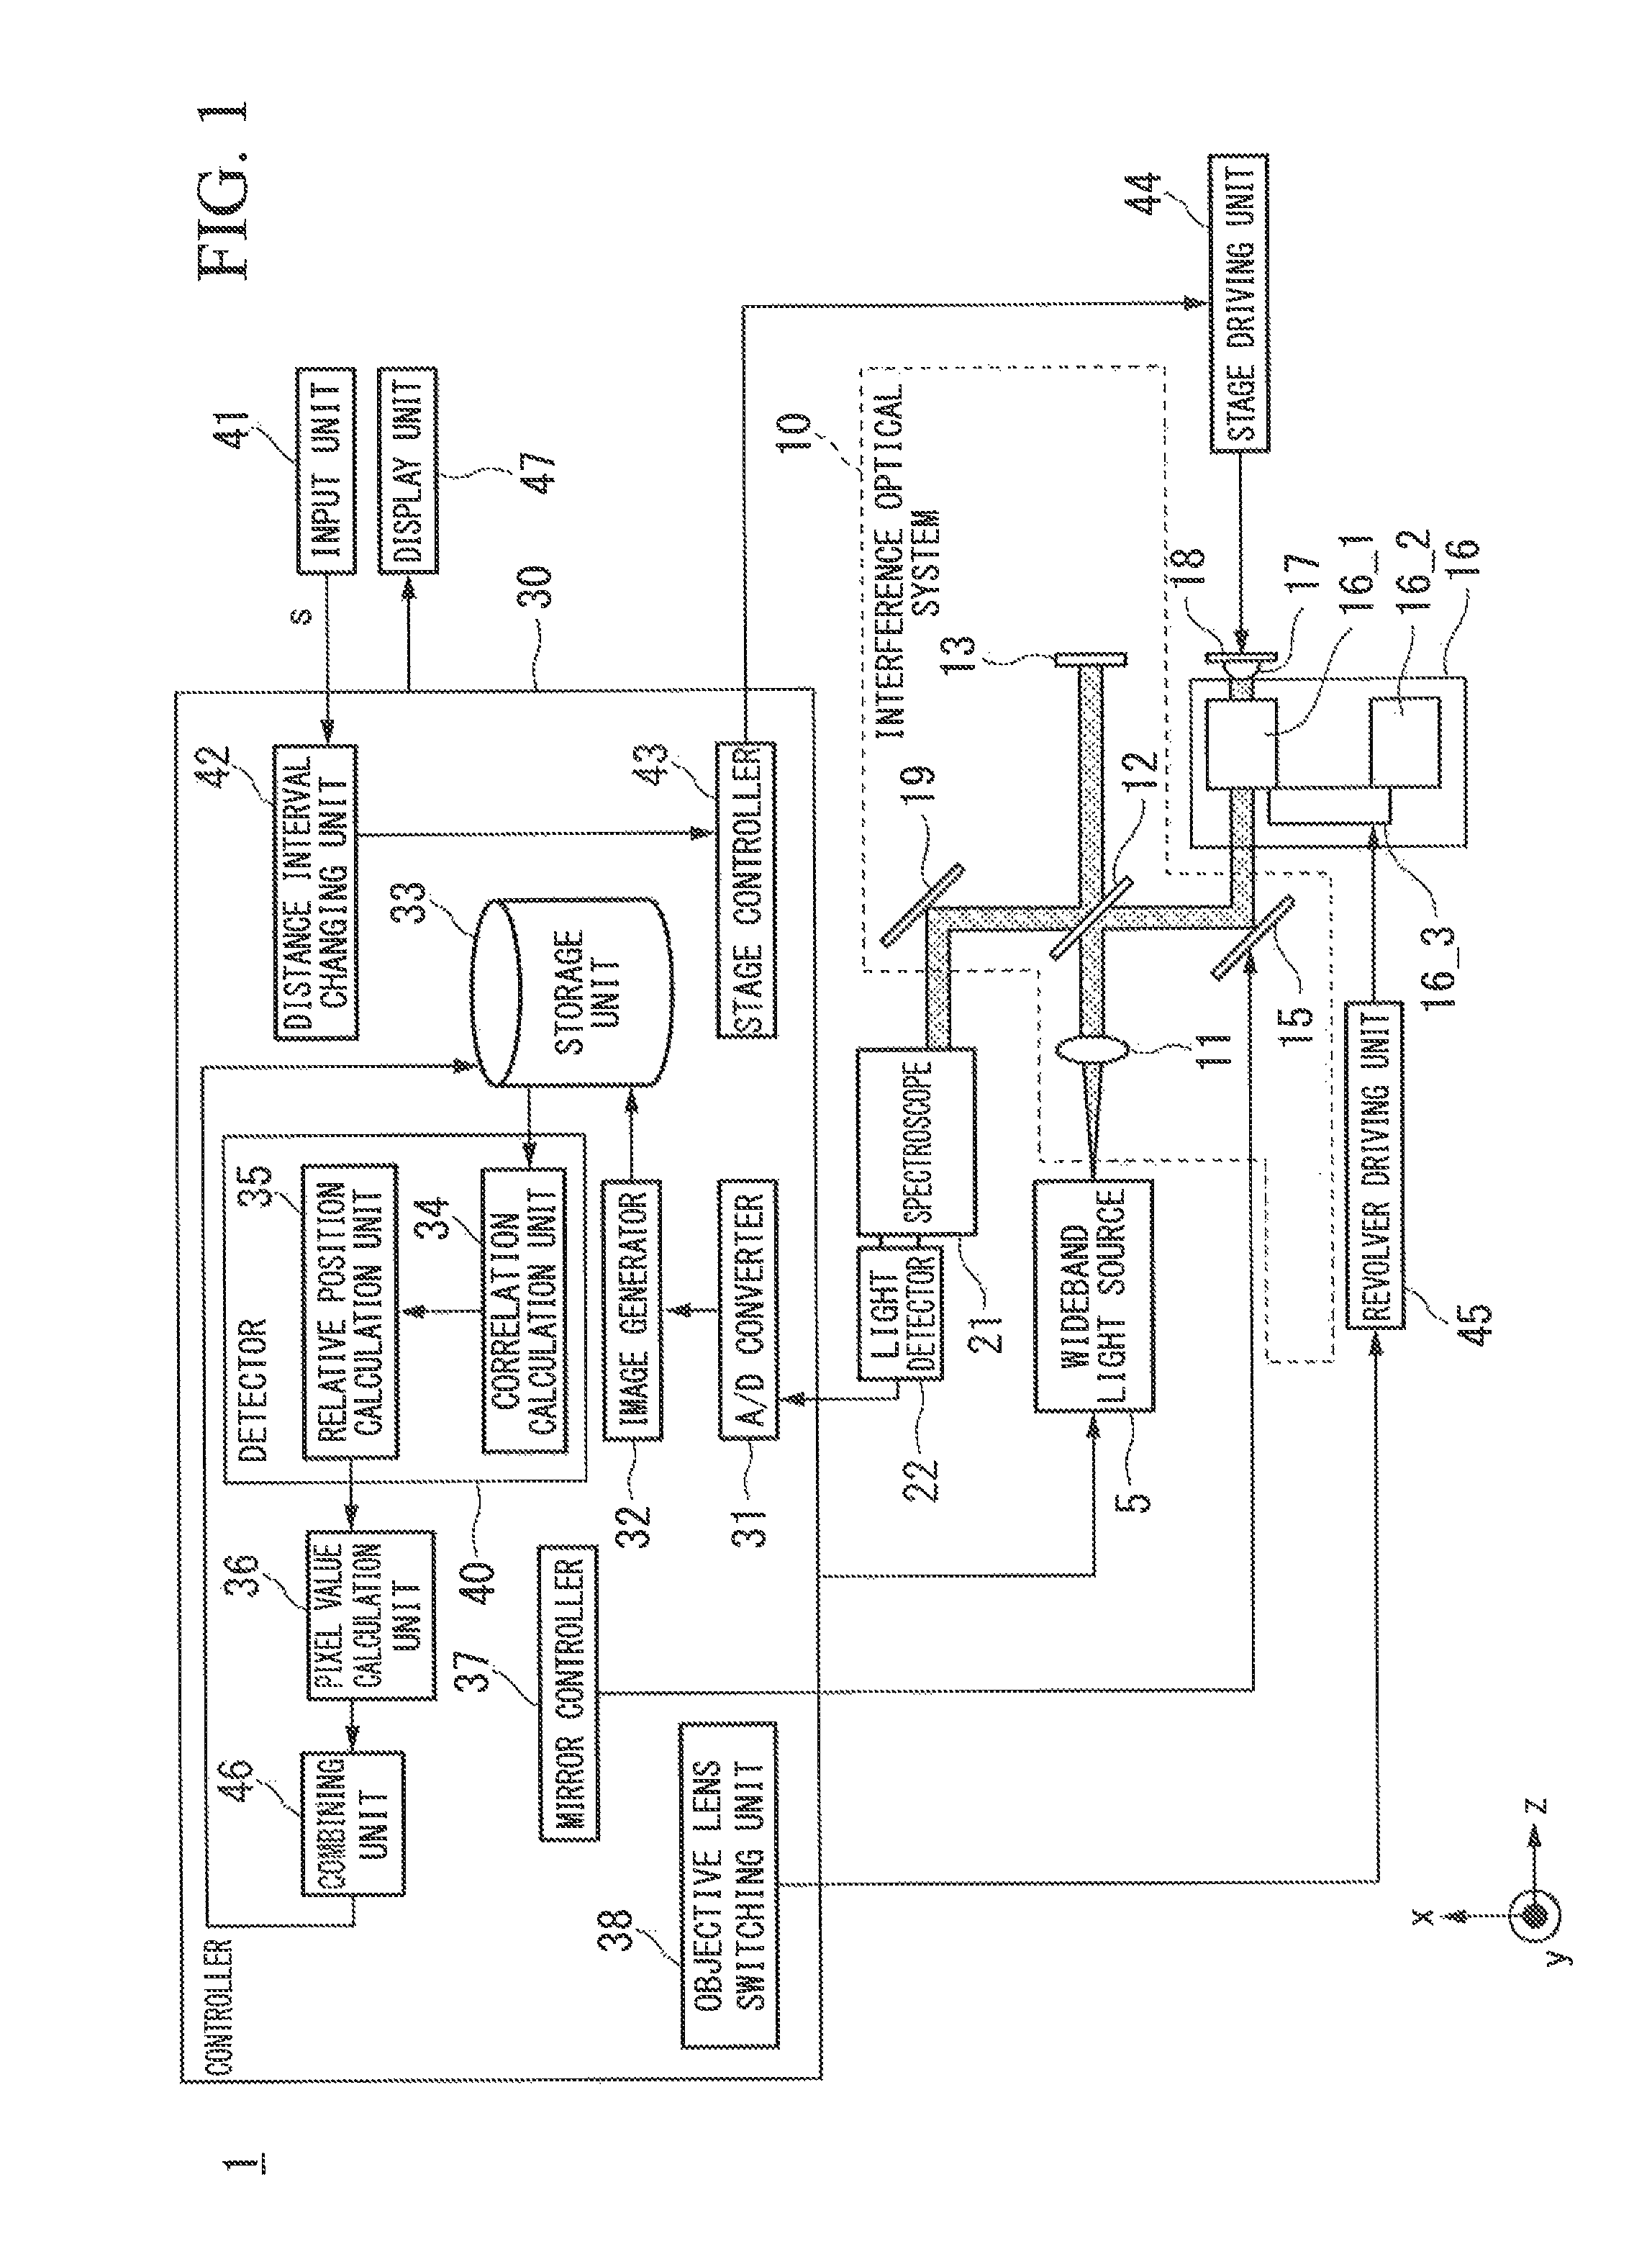 Optical coherence tomography observation apparatus, method for determining relative position of images, and program for determining relative position of images